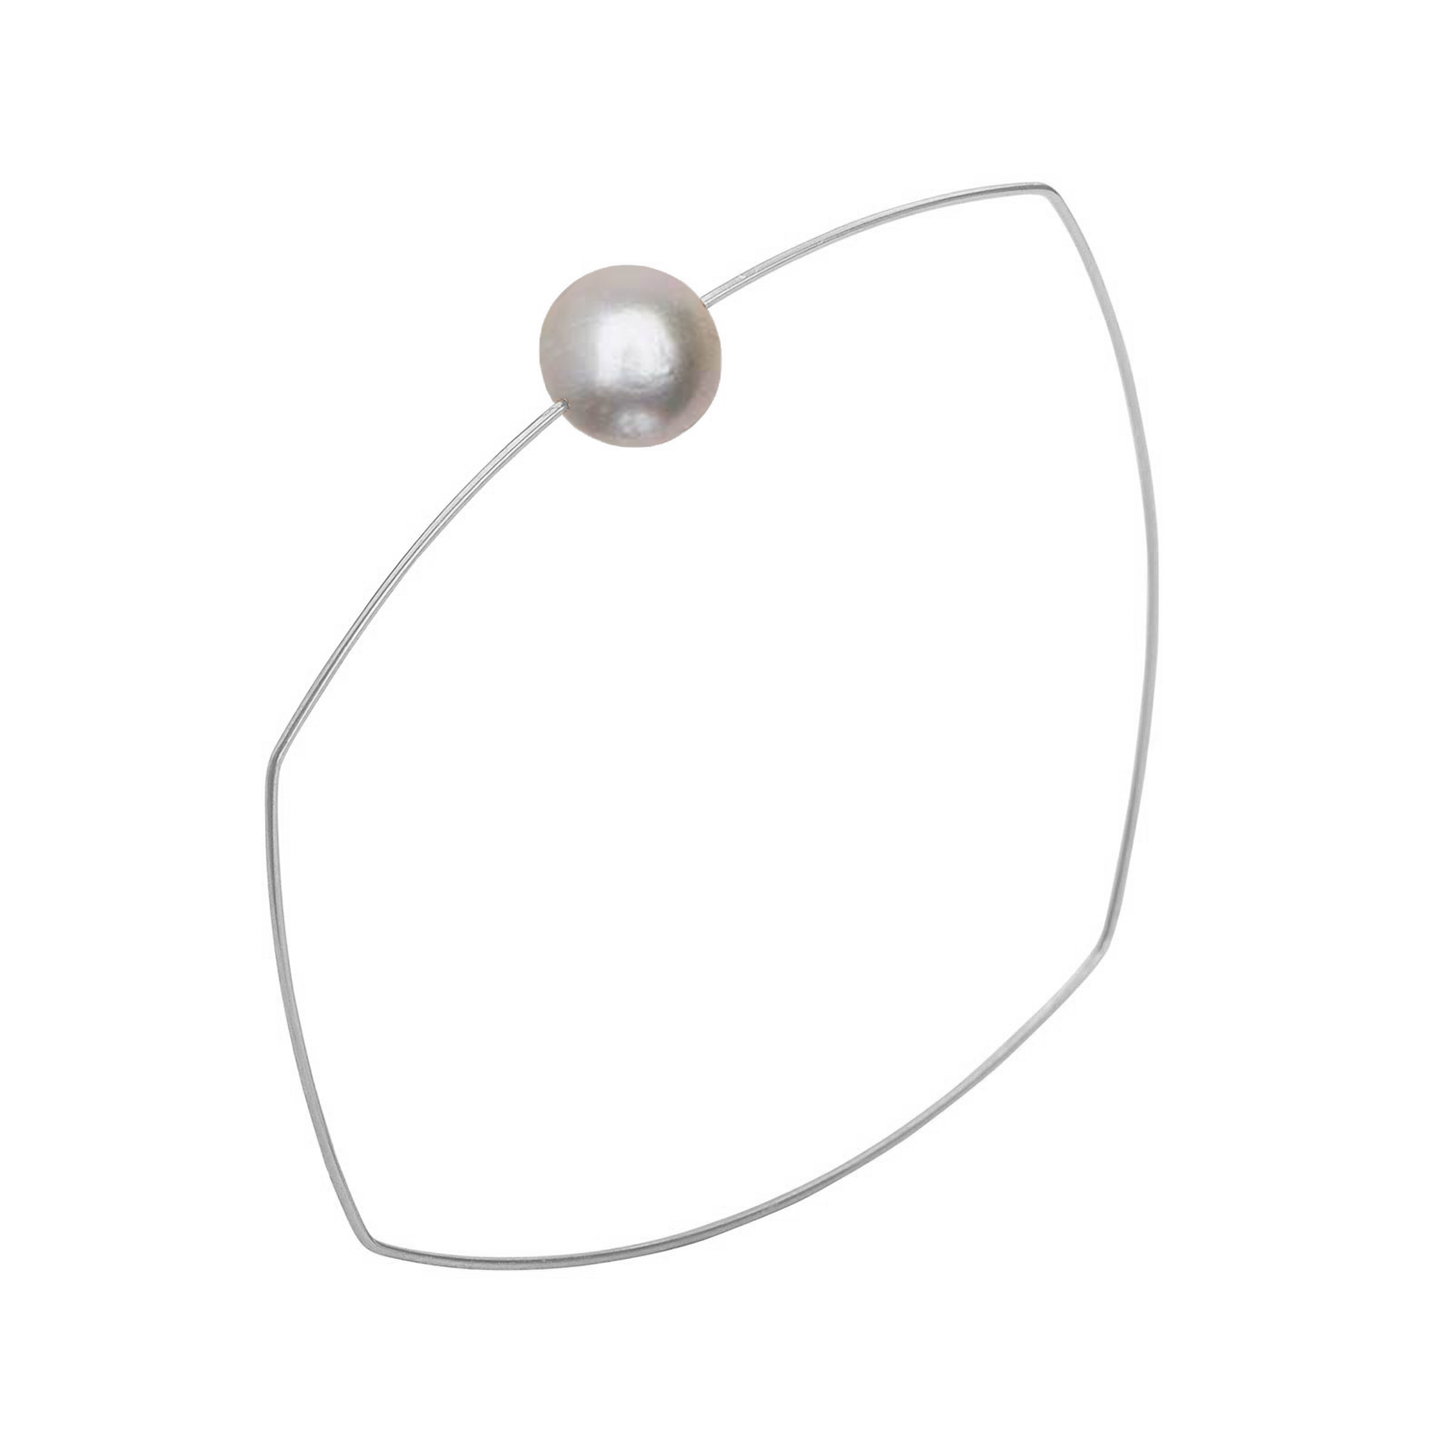 Asymmetric Square Bangle with 9mm Round Freshwater Pearl